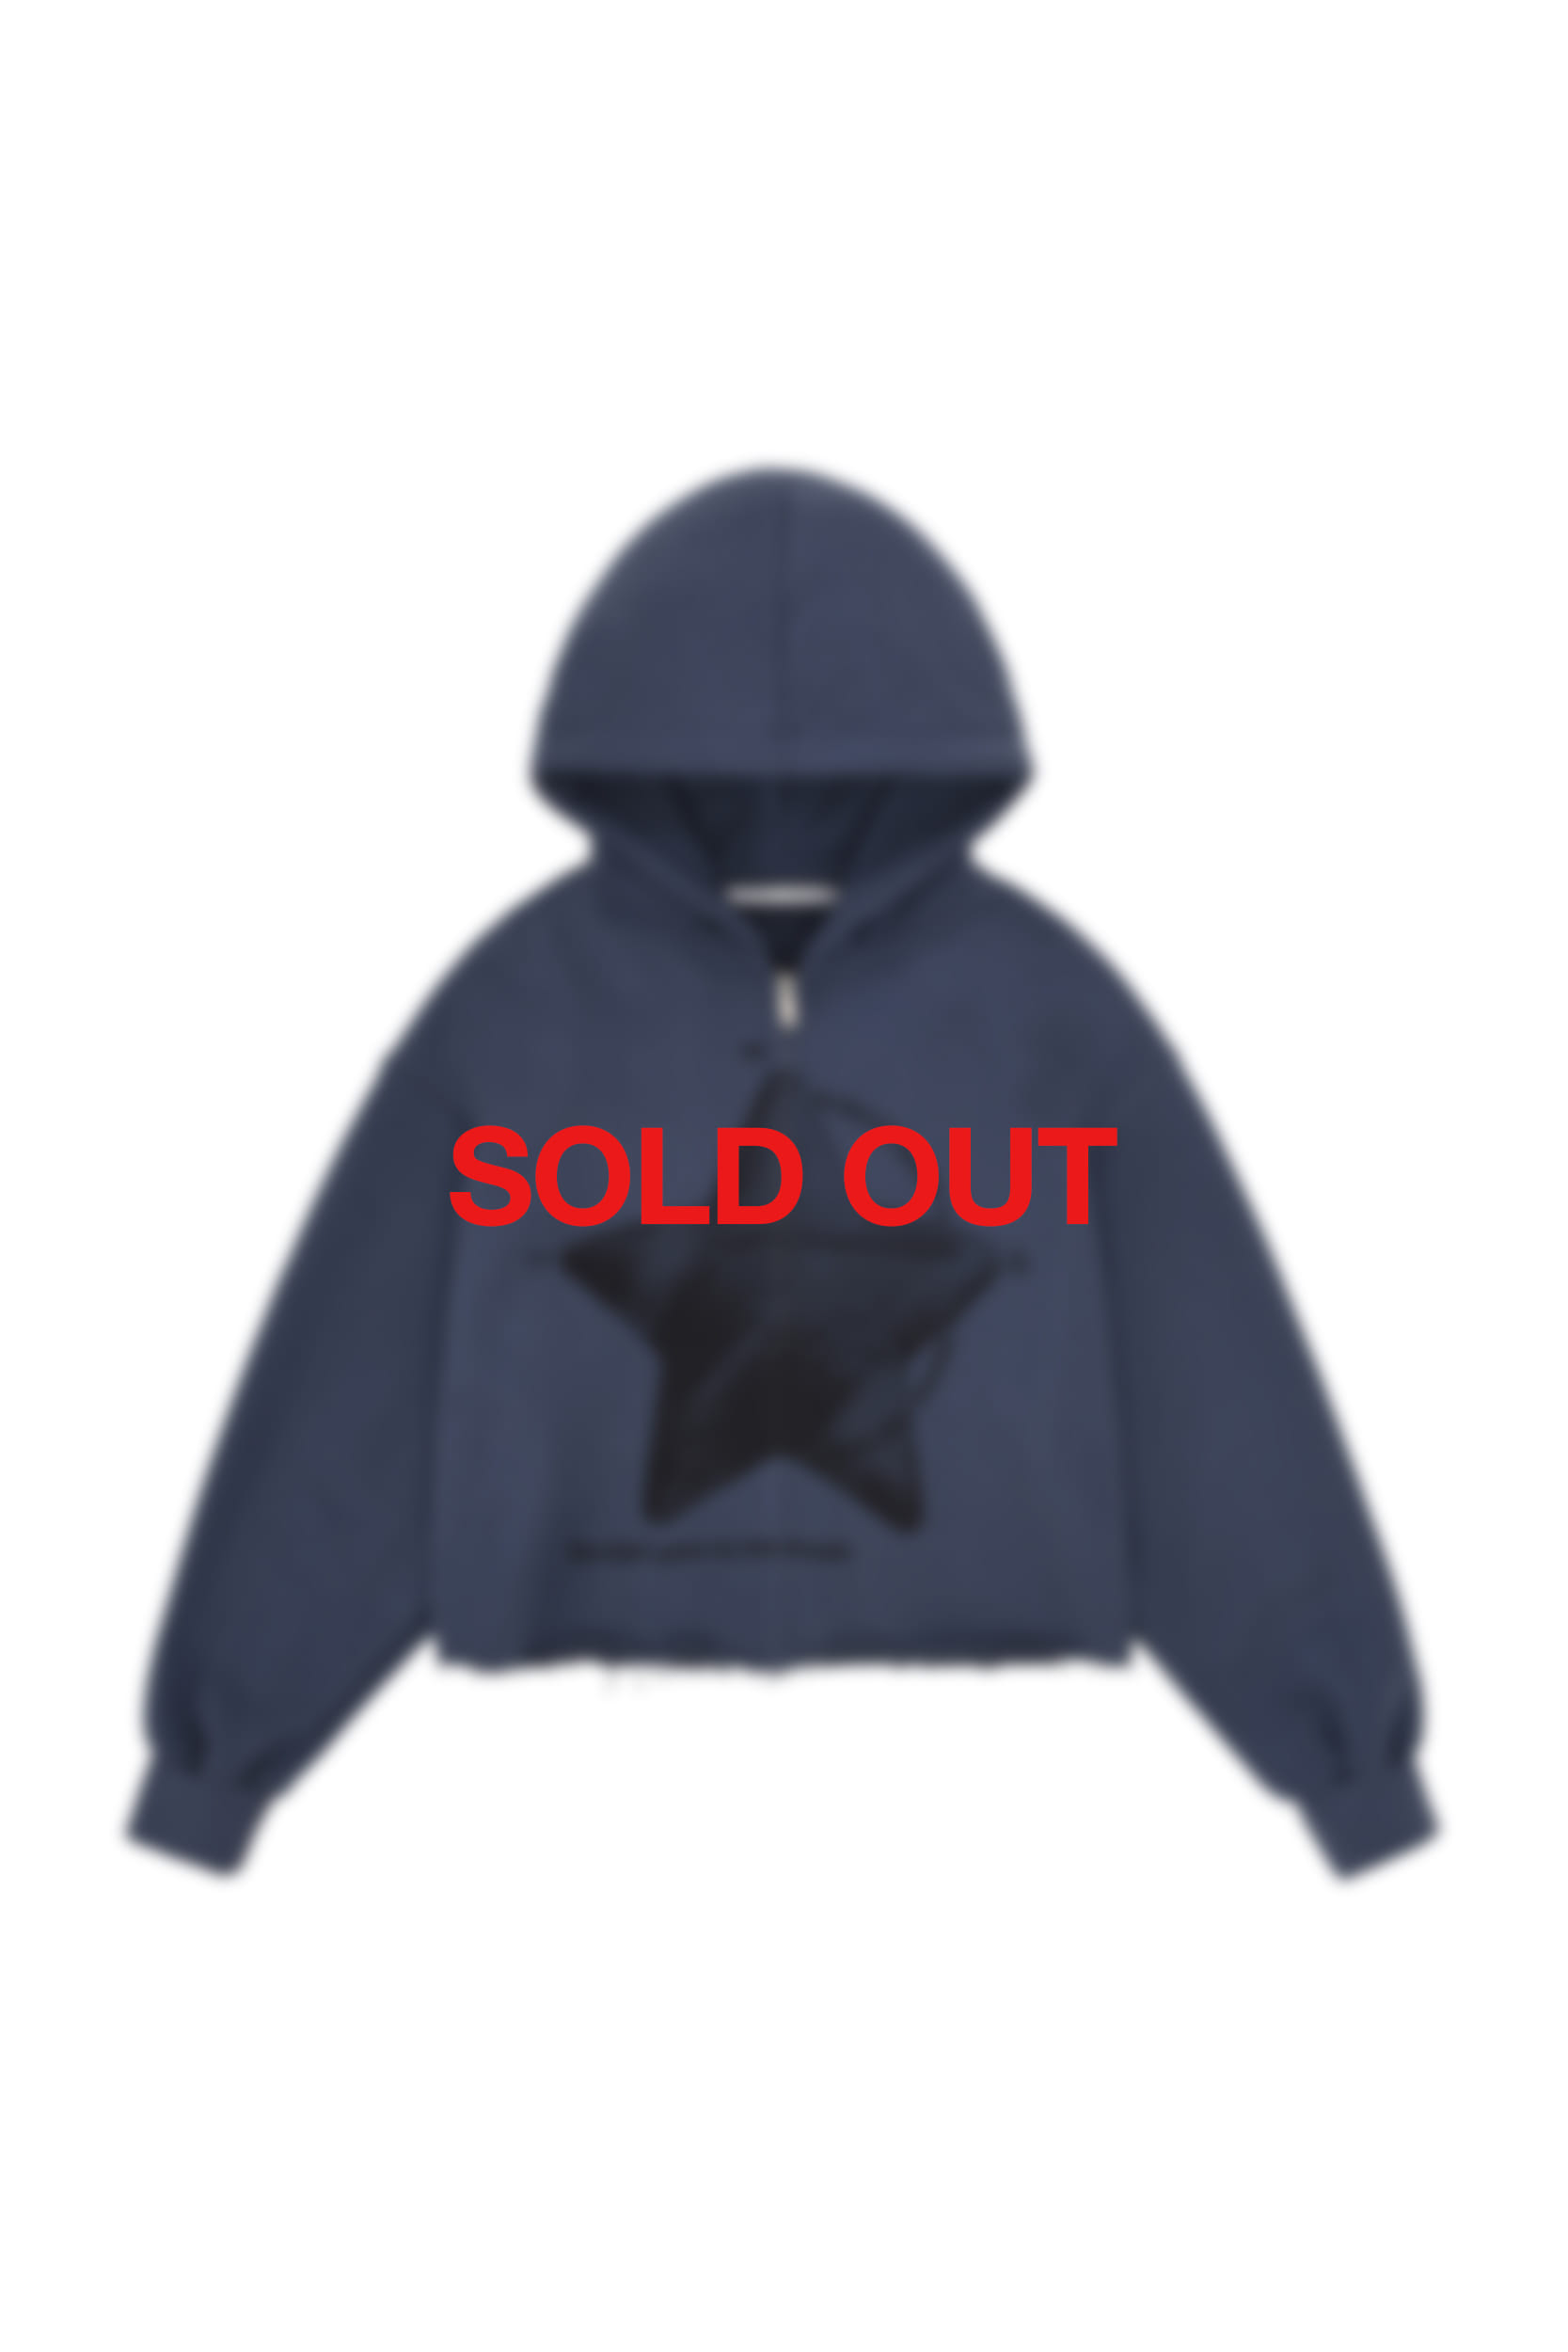 SEEING THE STARS HOOD ZIP-UP in midnight blue